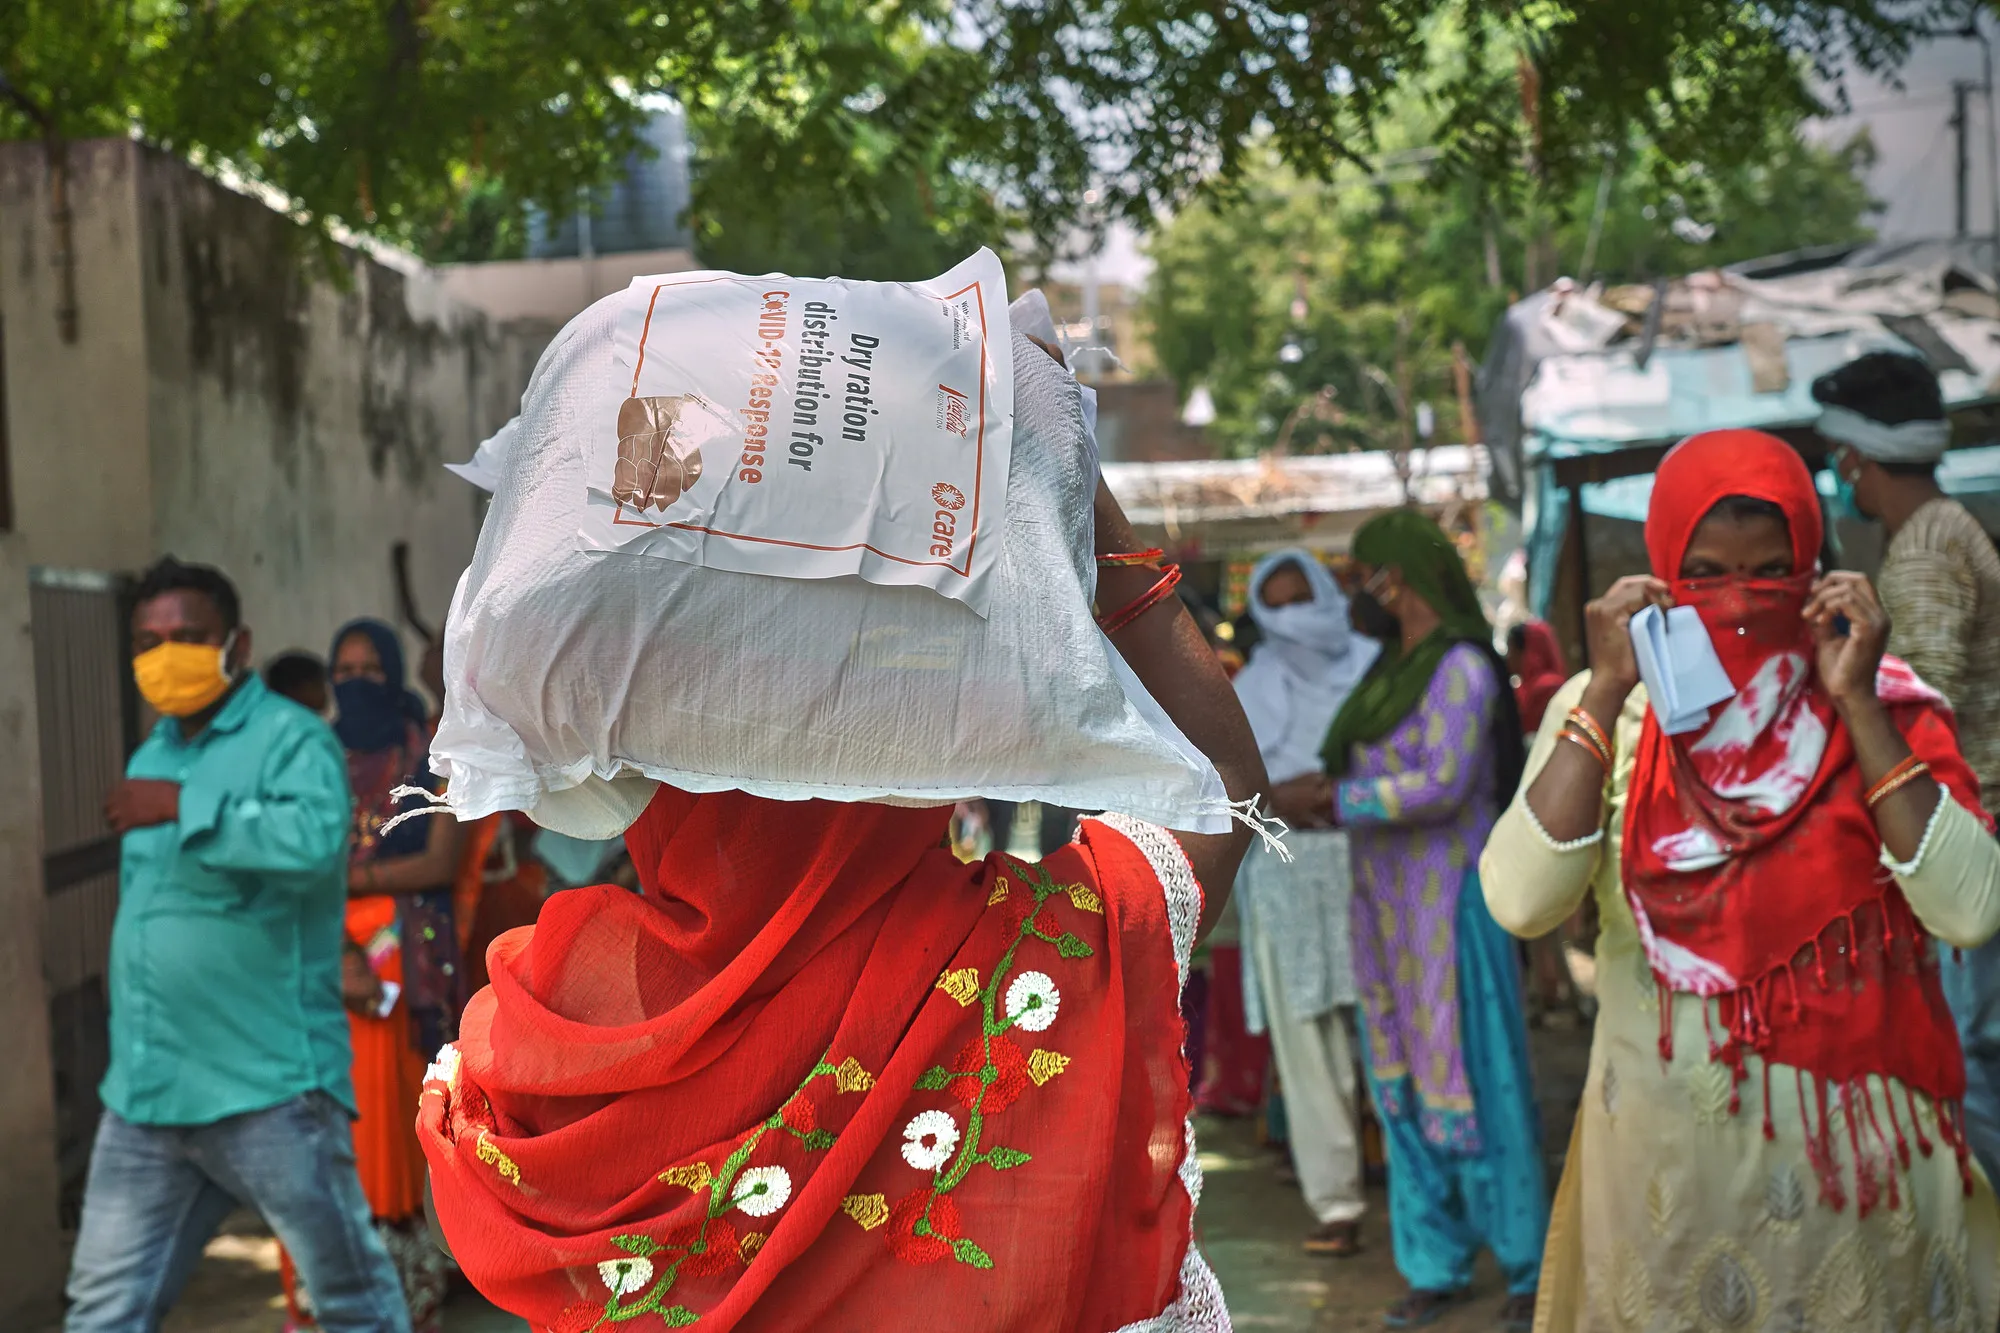 A woman carries a bag of supplies on her head.